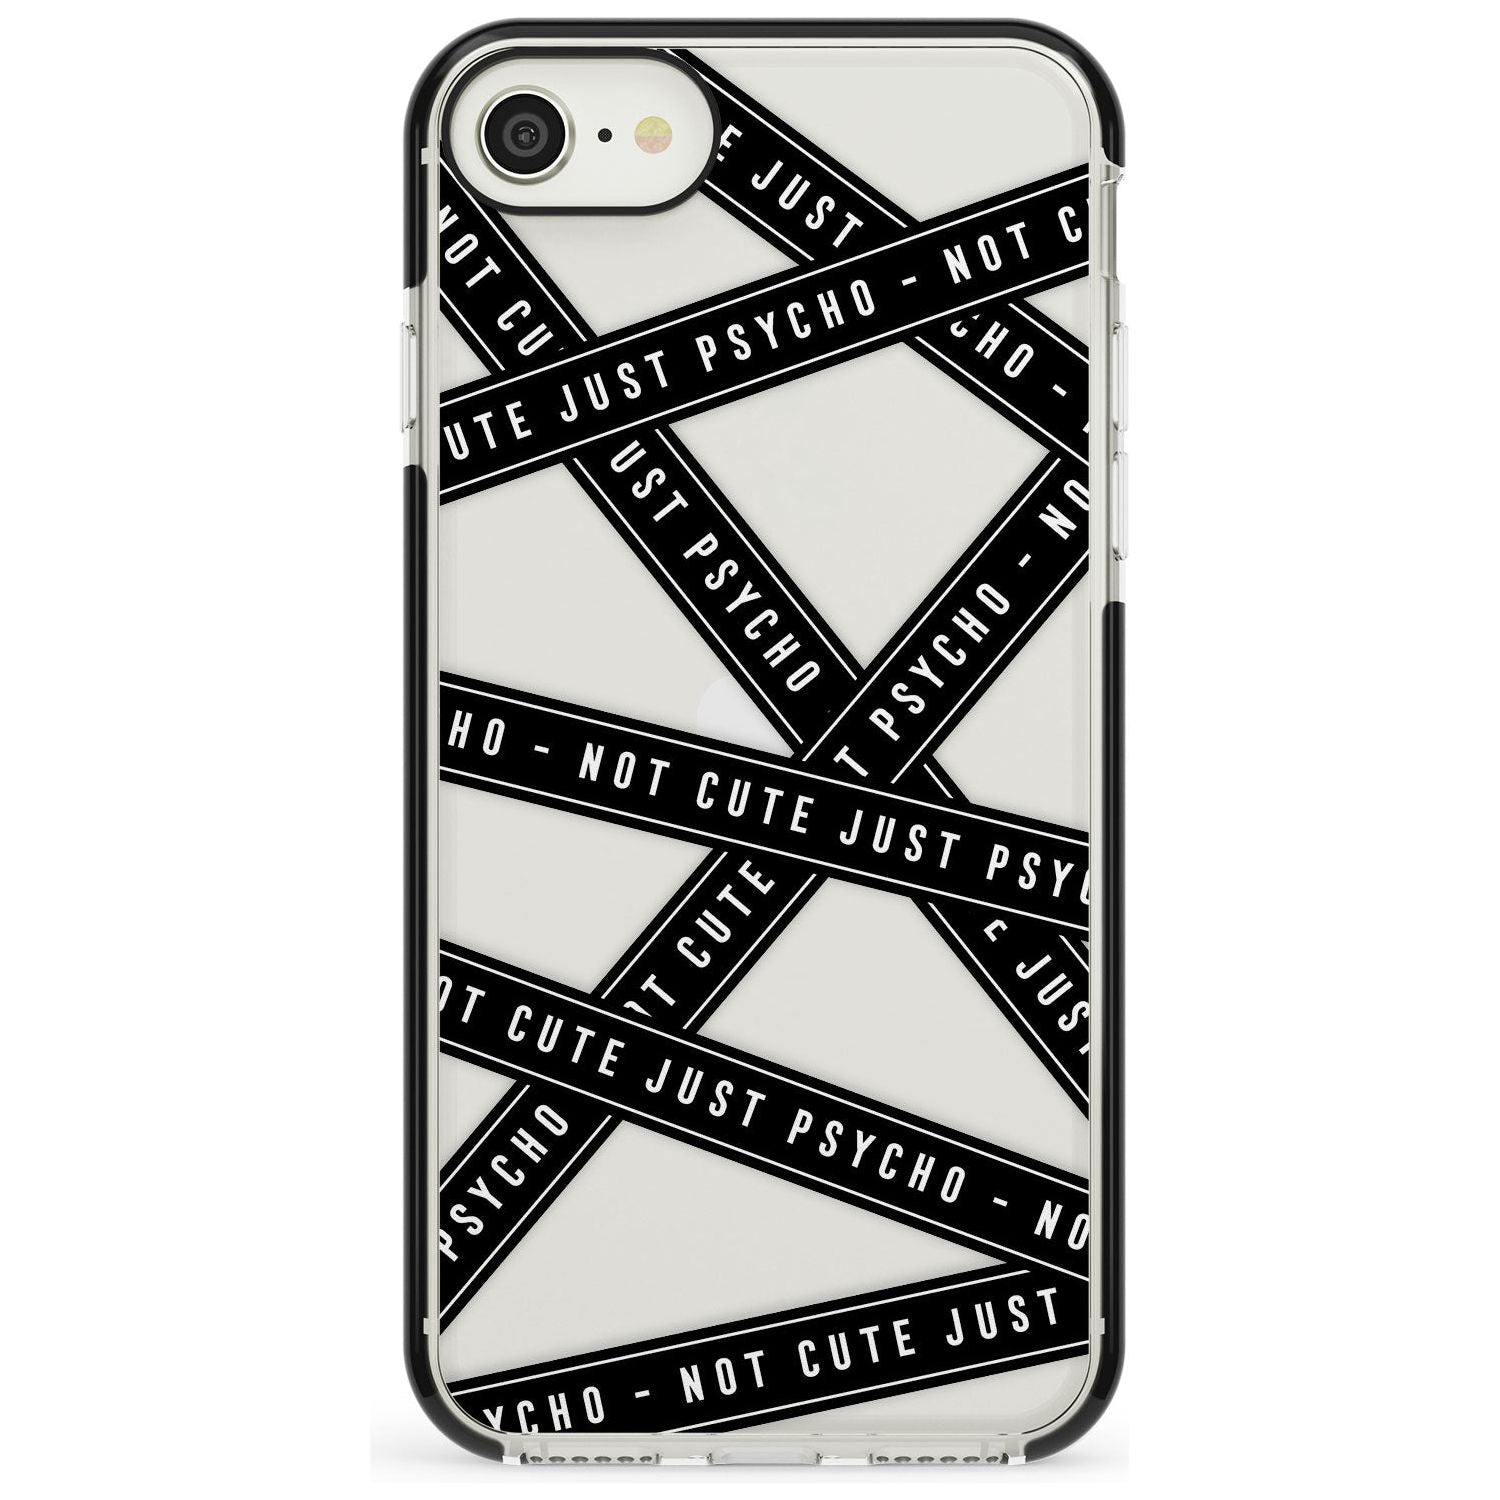 Caution Tape (Clear) Not Cute Just Psycho Black Impact Phone Case for iPhone SE 8 7 Plus